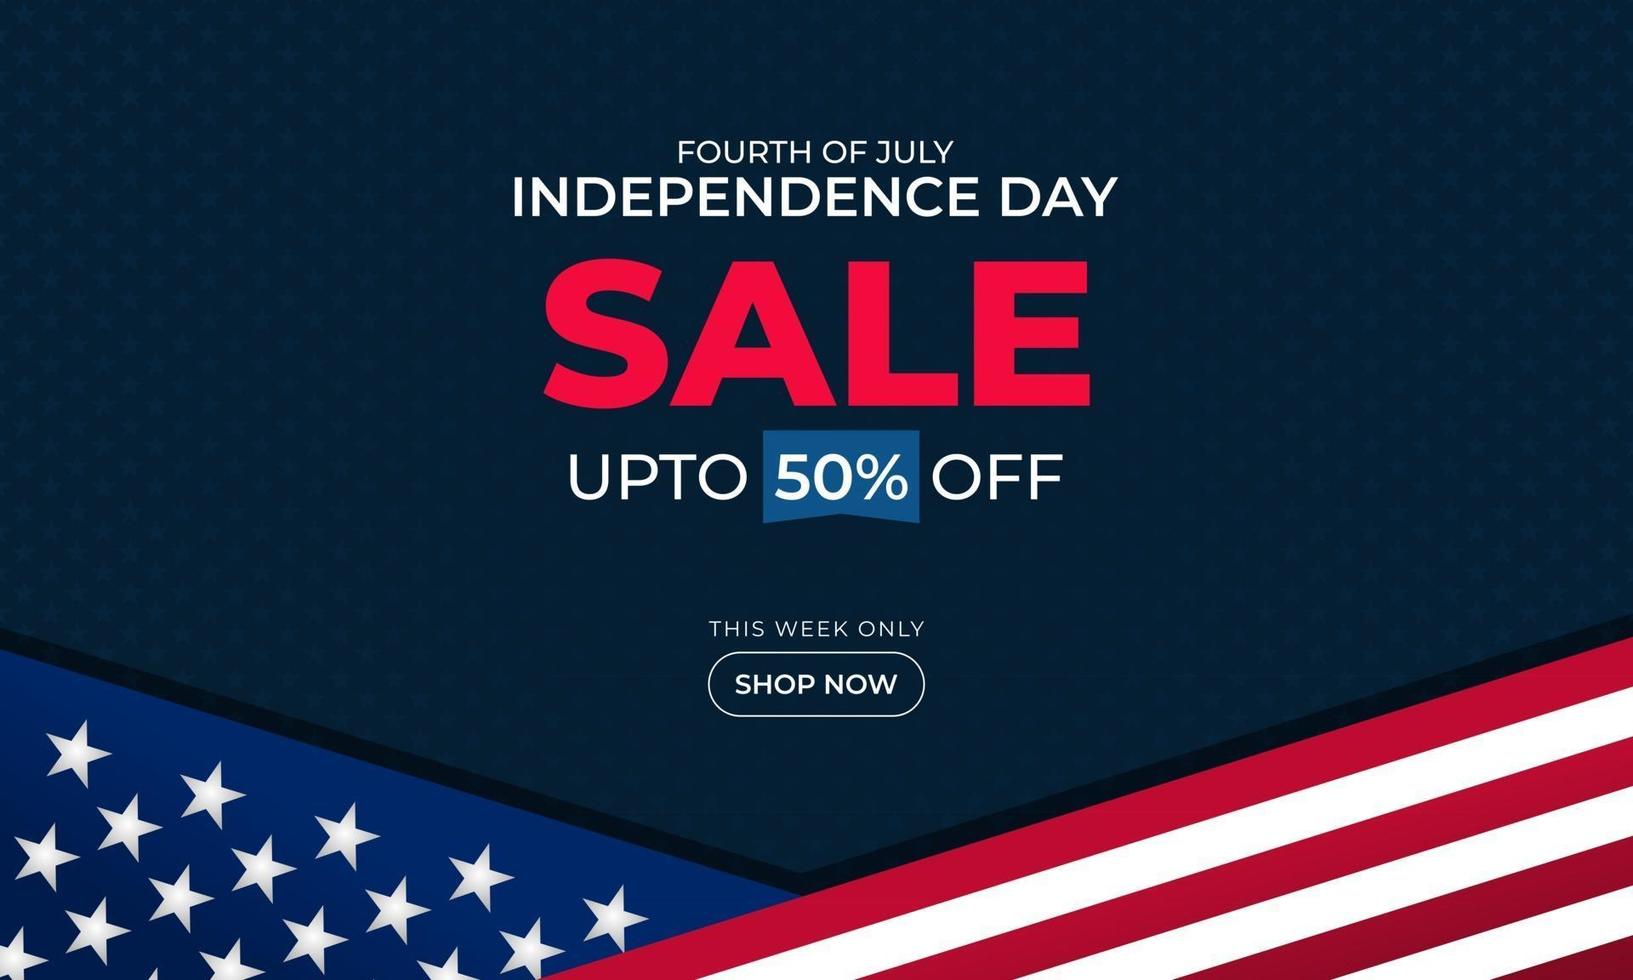 4th of july independence day background sales promotion advertising banner template with american flag design vector